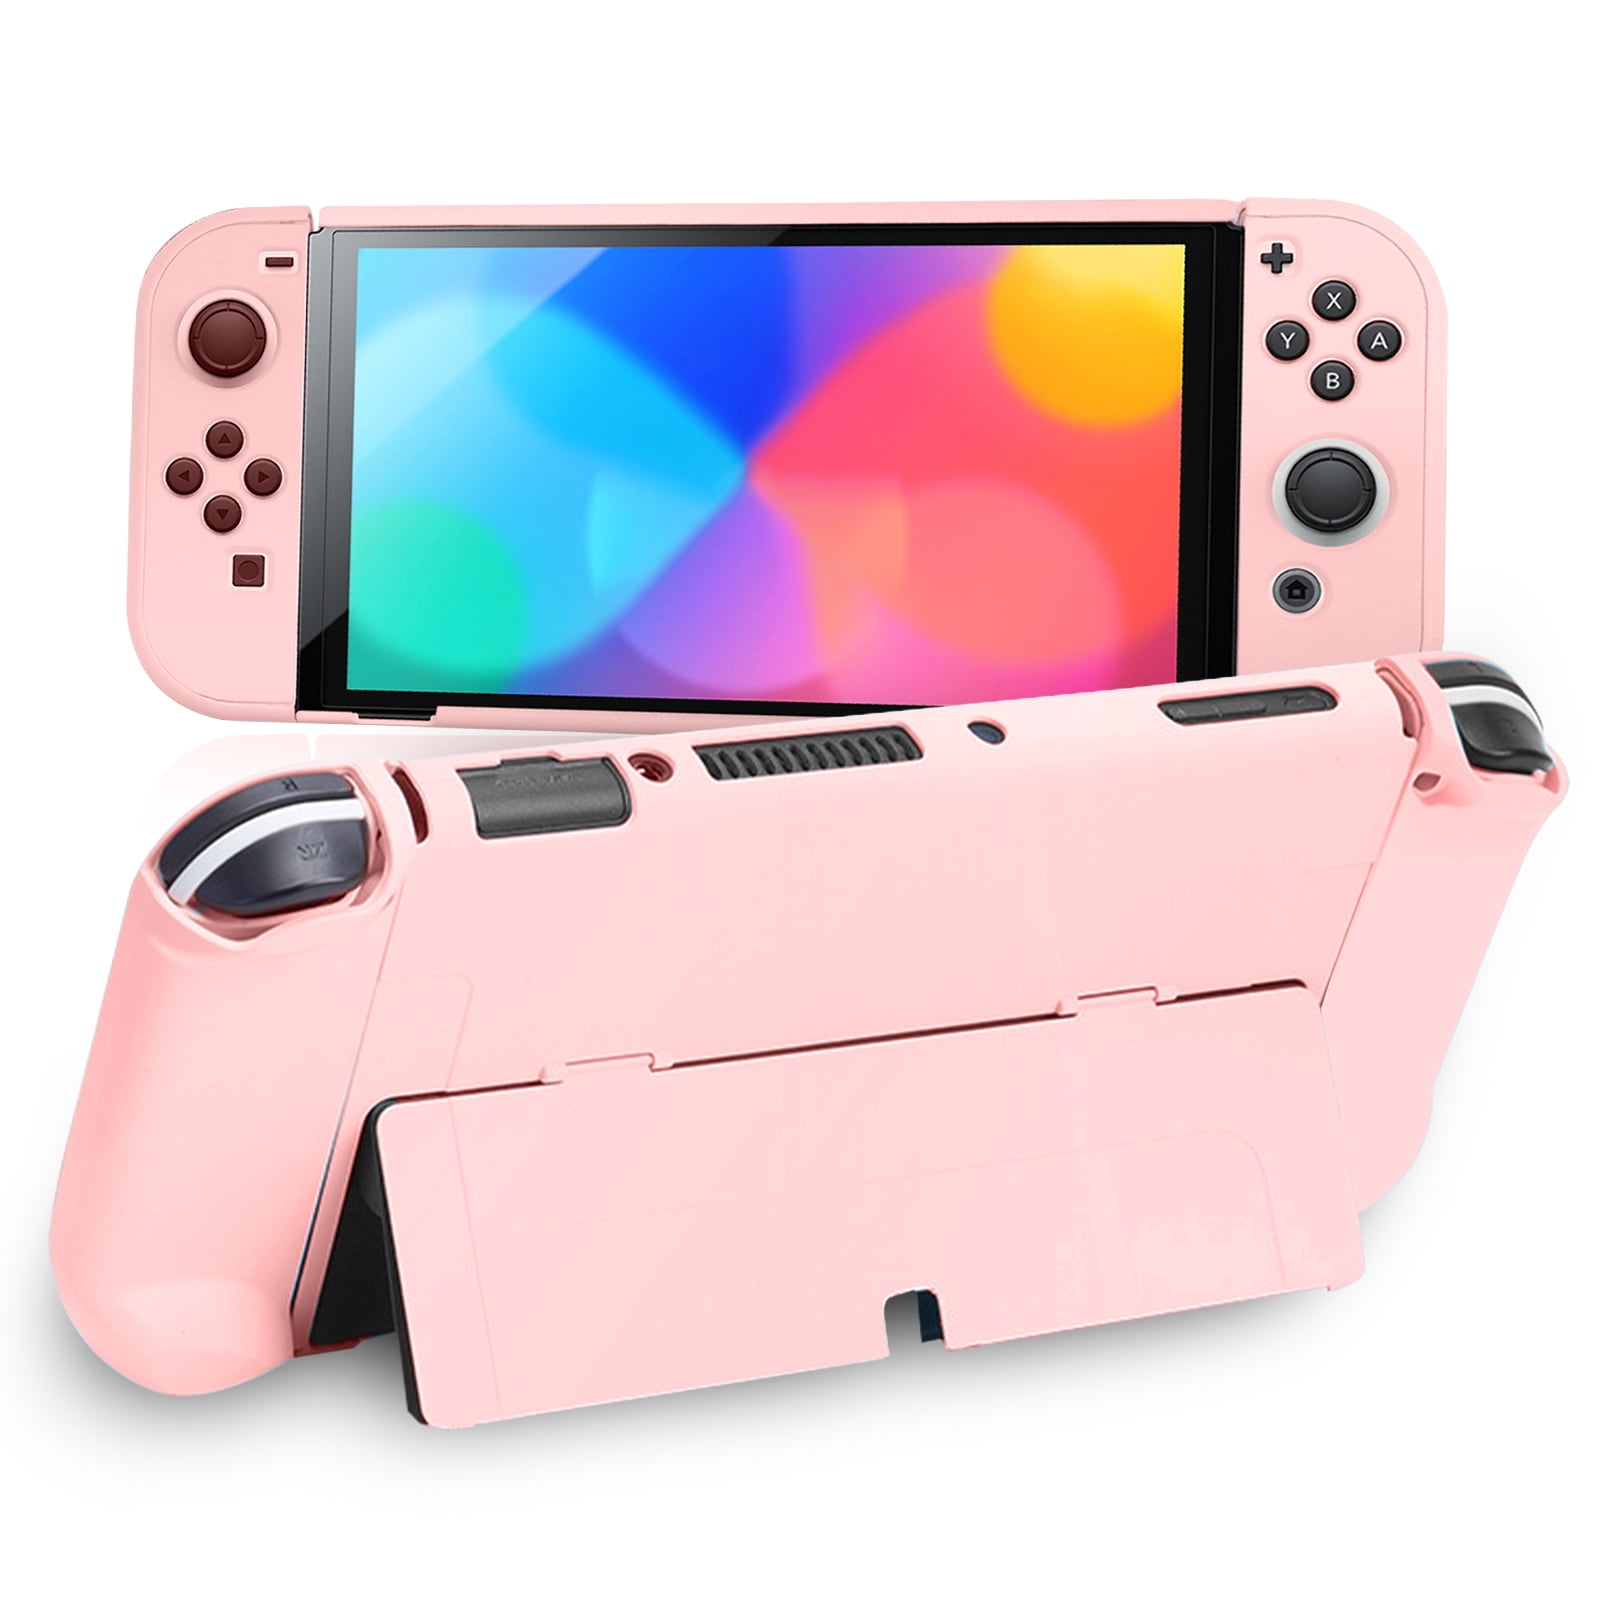 Dockable Protective Case Fit for Nintendo Switch OLED, TSV Cute Case Cover for Switch & Joy-Con Controllers with Screen Protector, 2 Cat Paw Thumb Grips for Girls - Walmart.com